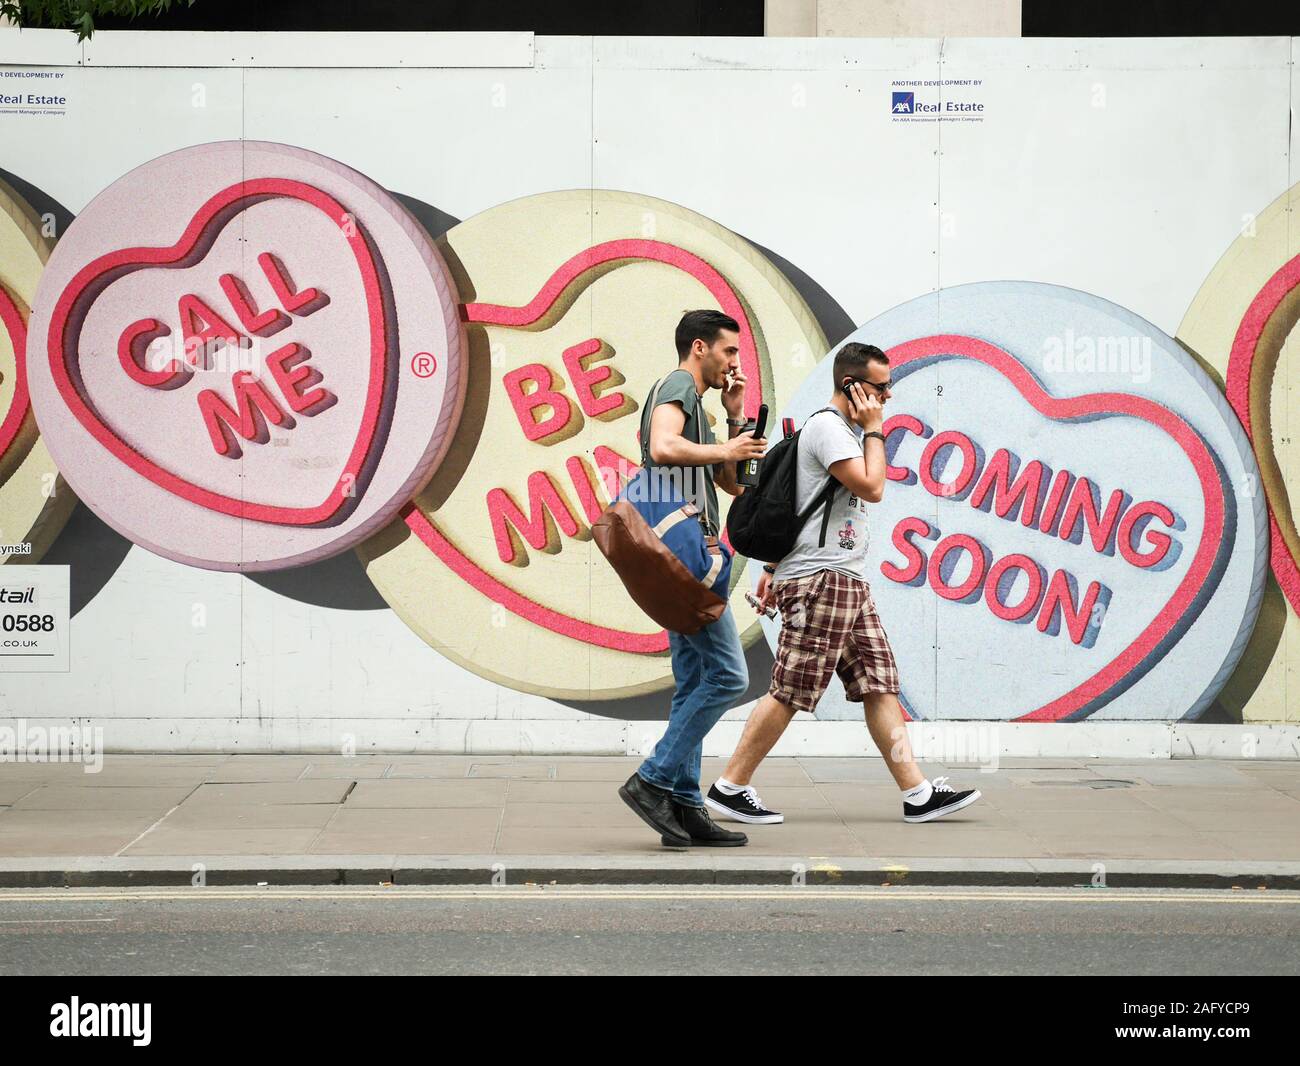 Love Hearts: Call Me. Pedestrians on mobile phones walking by advertising for Love Hearts, a UK sweet brand, with the slogan 'Call Me'. Stock Photo